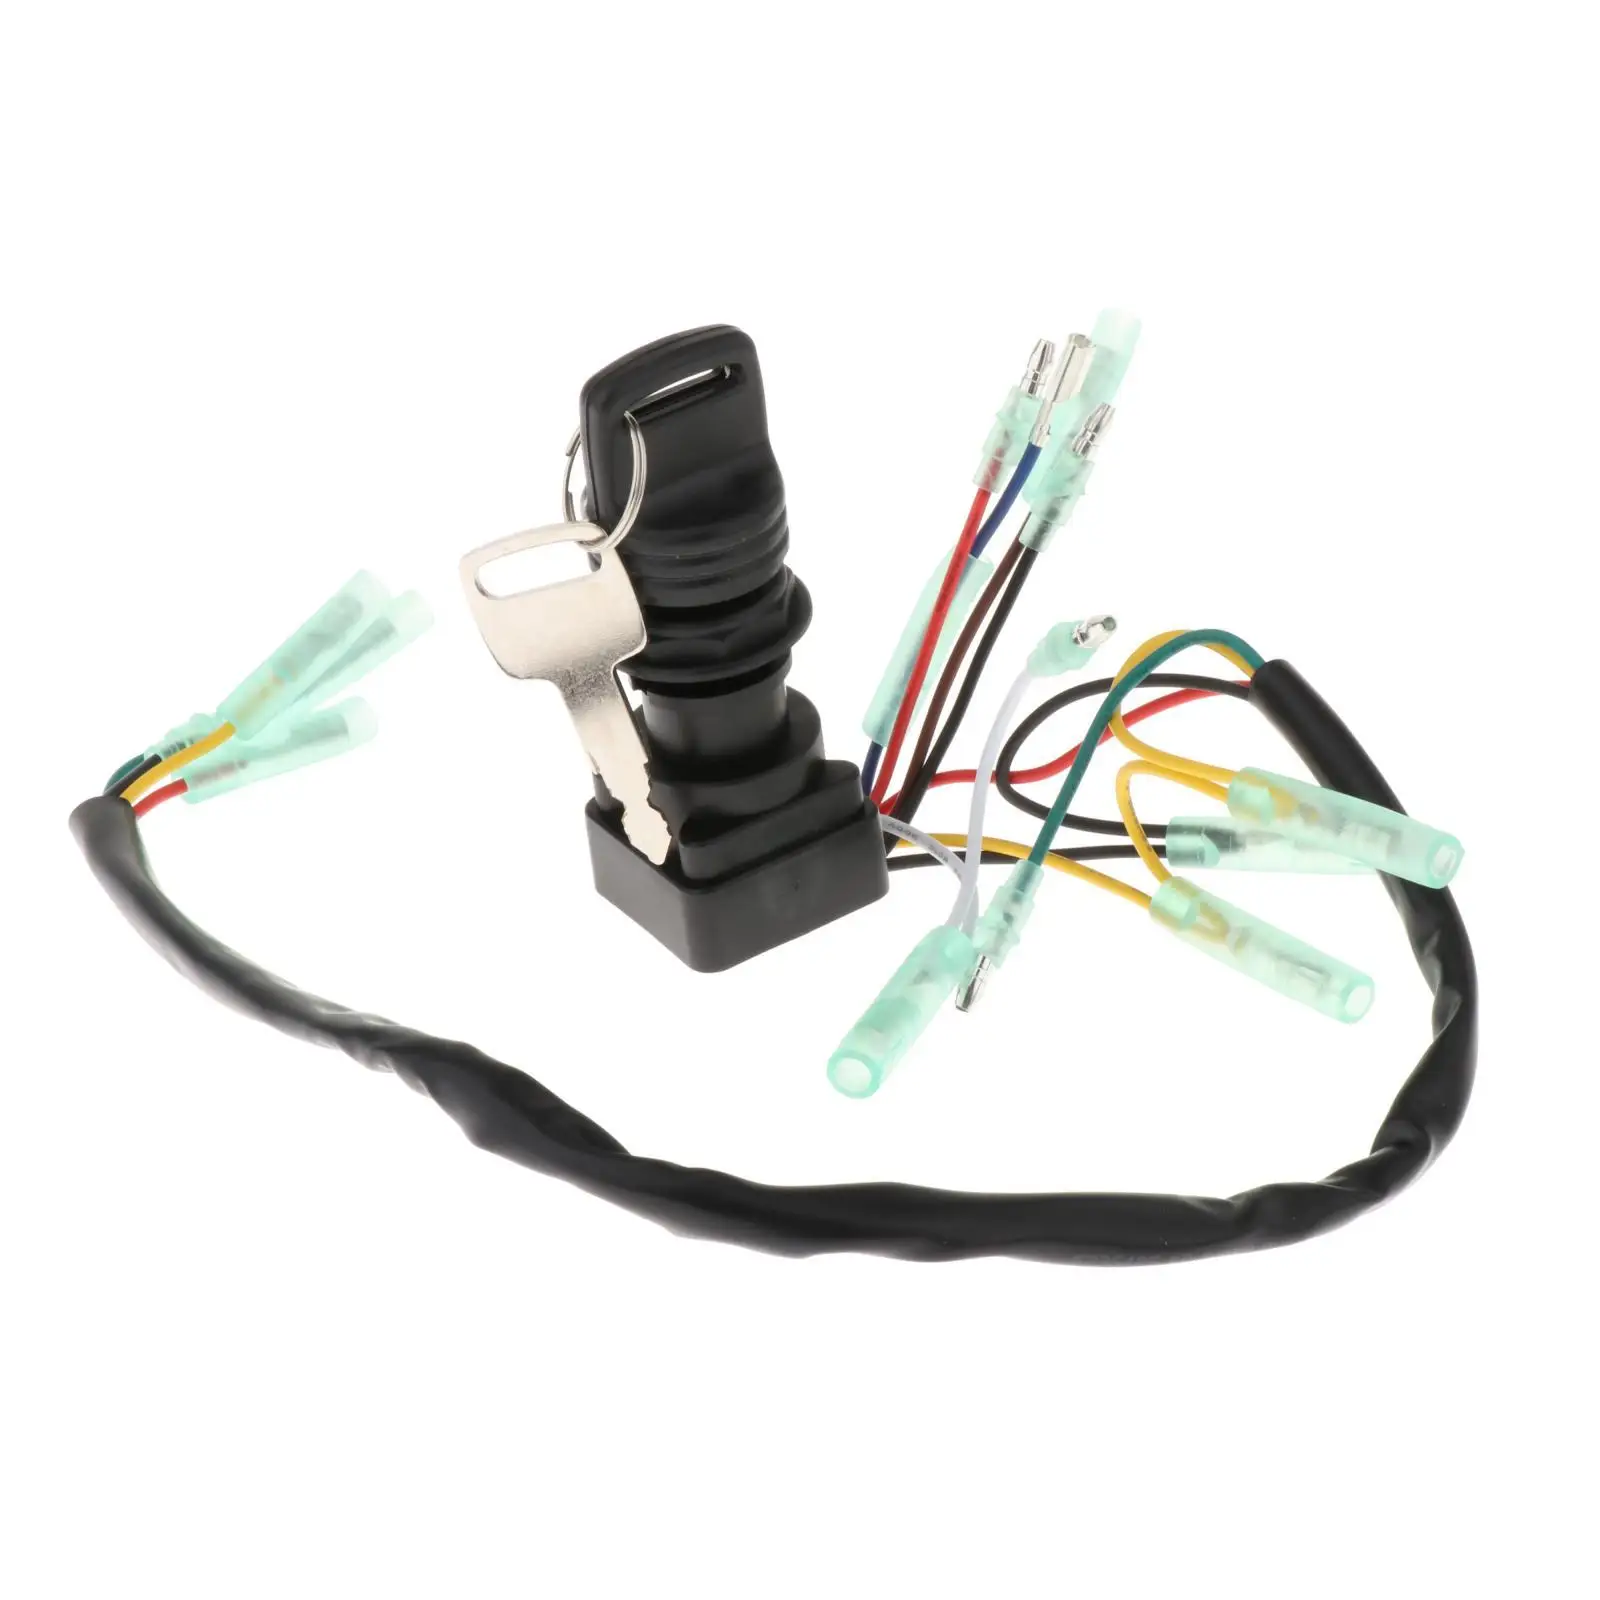 Remote Control Box Ignition Switch 703-82510-43-00 Direct Replacement Vehicle